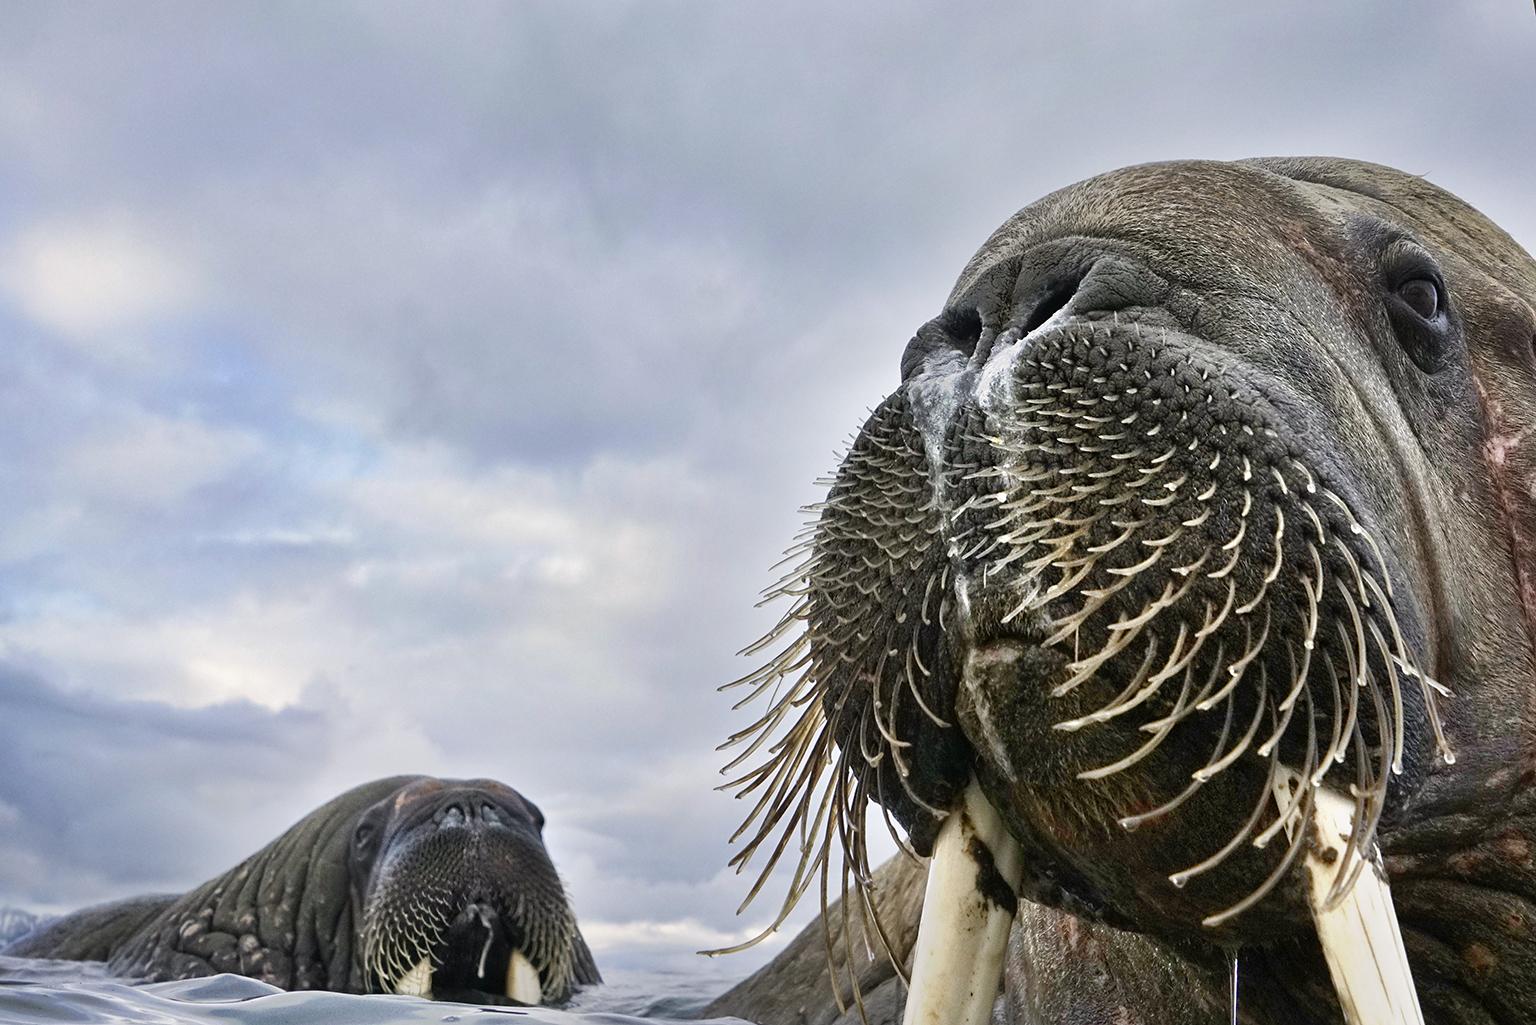 Having spotted walruses from his dinghy off the coast of Svalbard, Norway, photographer Valter Bernardeschi slipped into icy water to photograph them. He captured these young walruses with his camera on a float. (© Valter Bernardeschi, Italy)